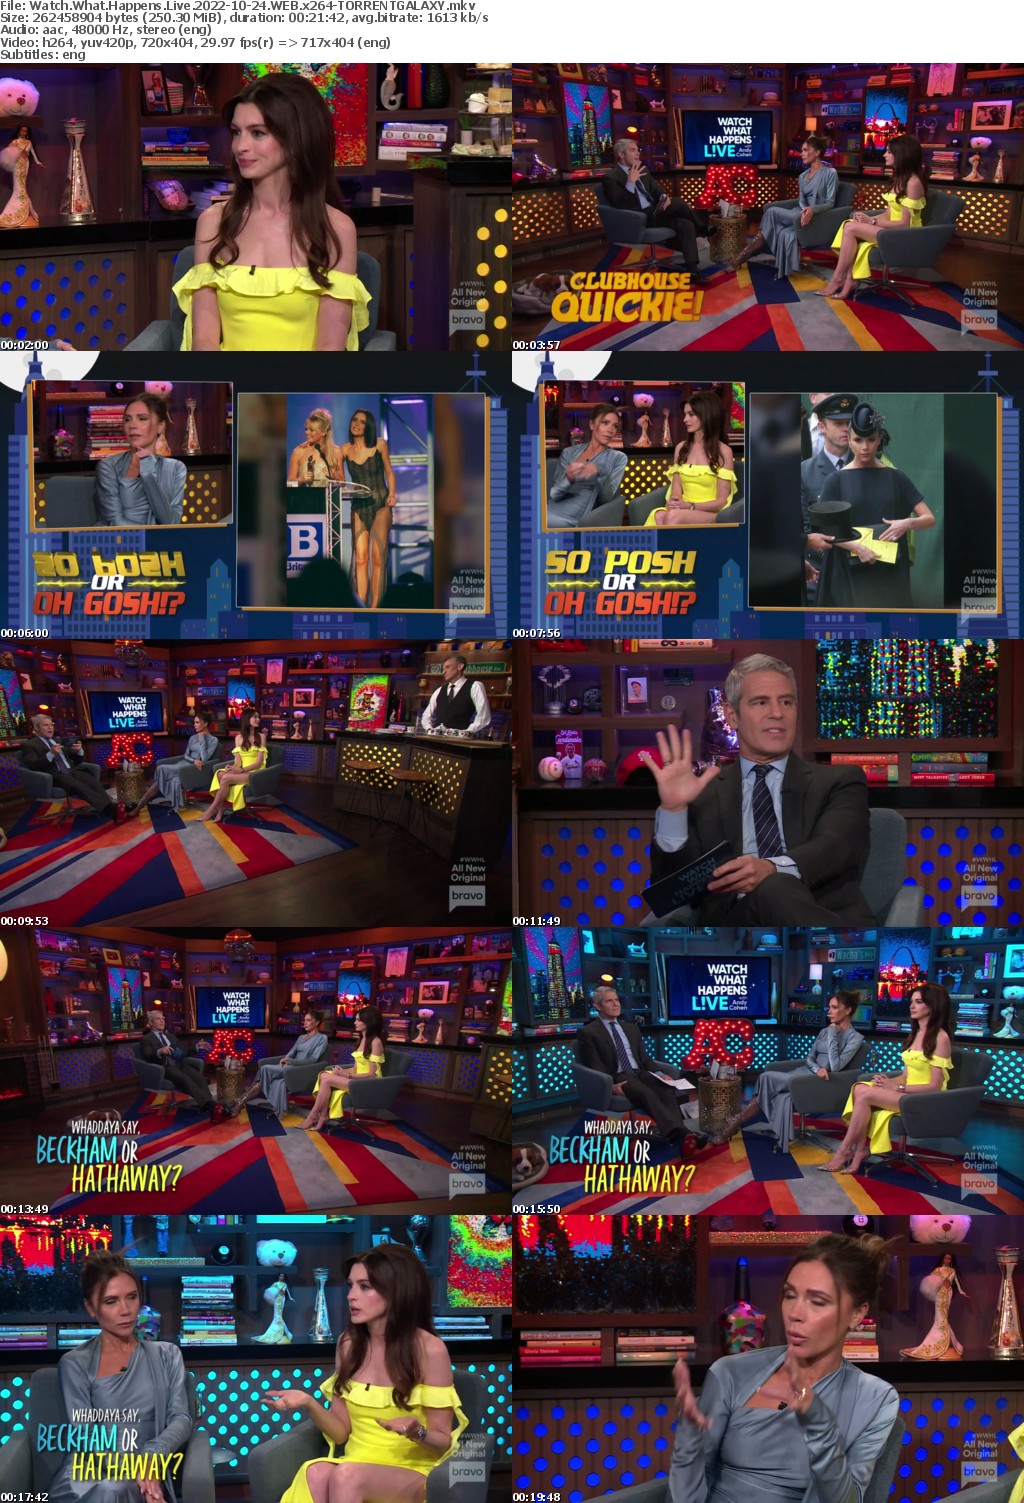 Watch What Happens Live 2022-10-24 WEB x264-GALAXY